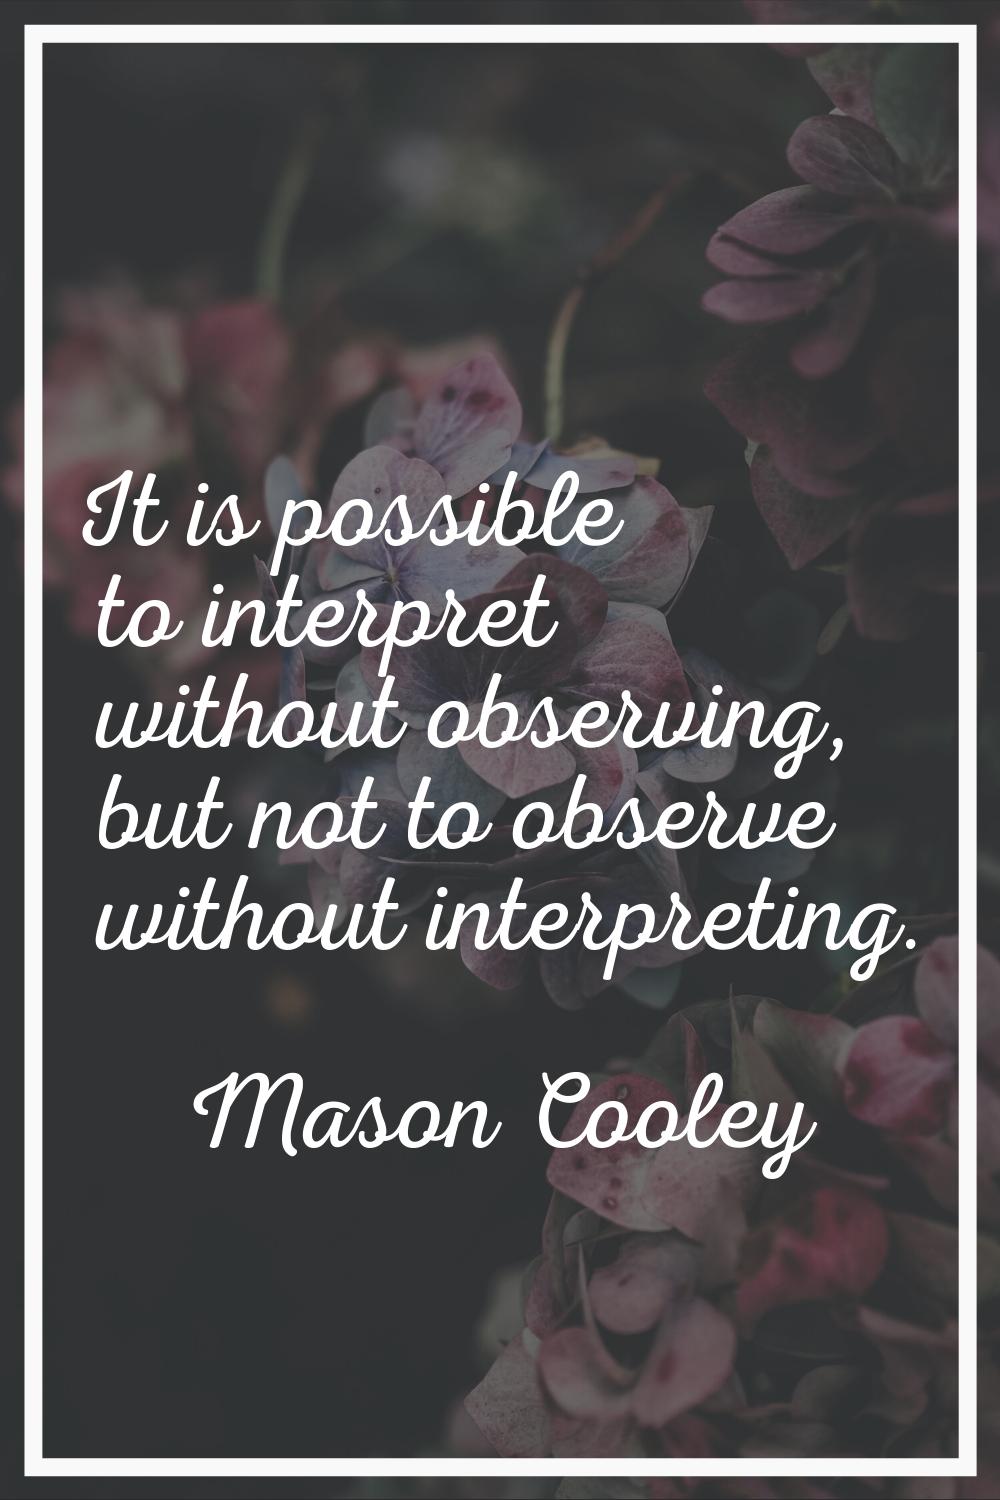 It is possible to interpret without observing, but not to observe without interpreting.